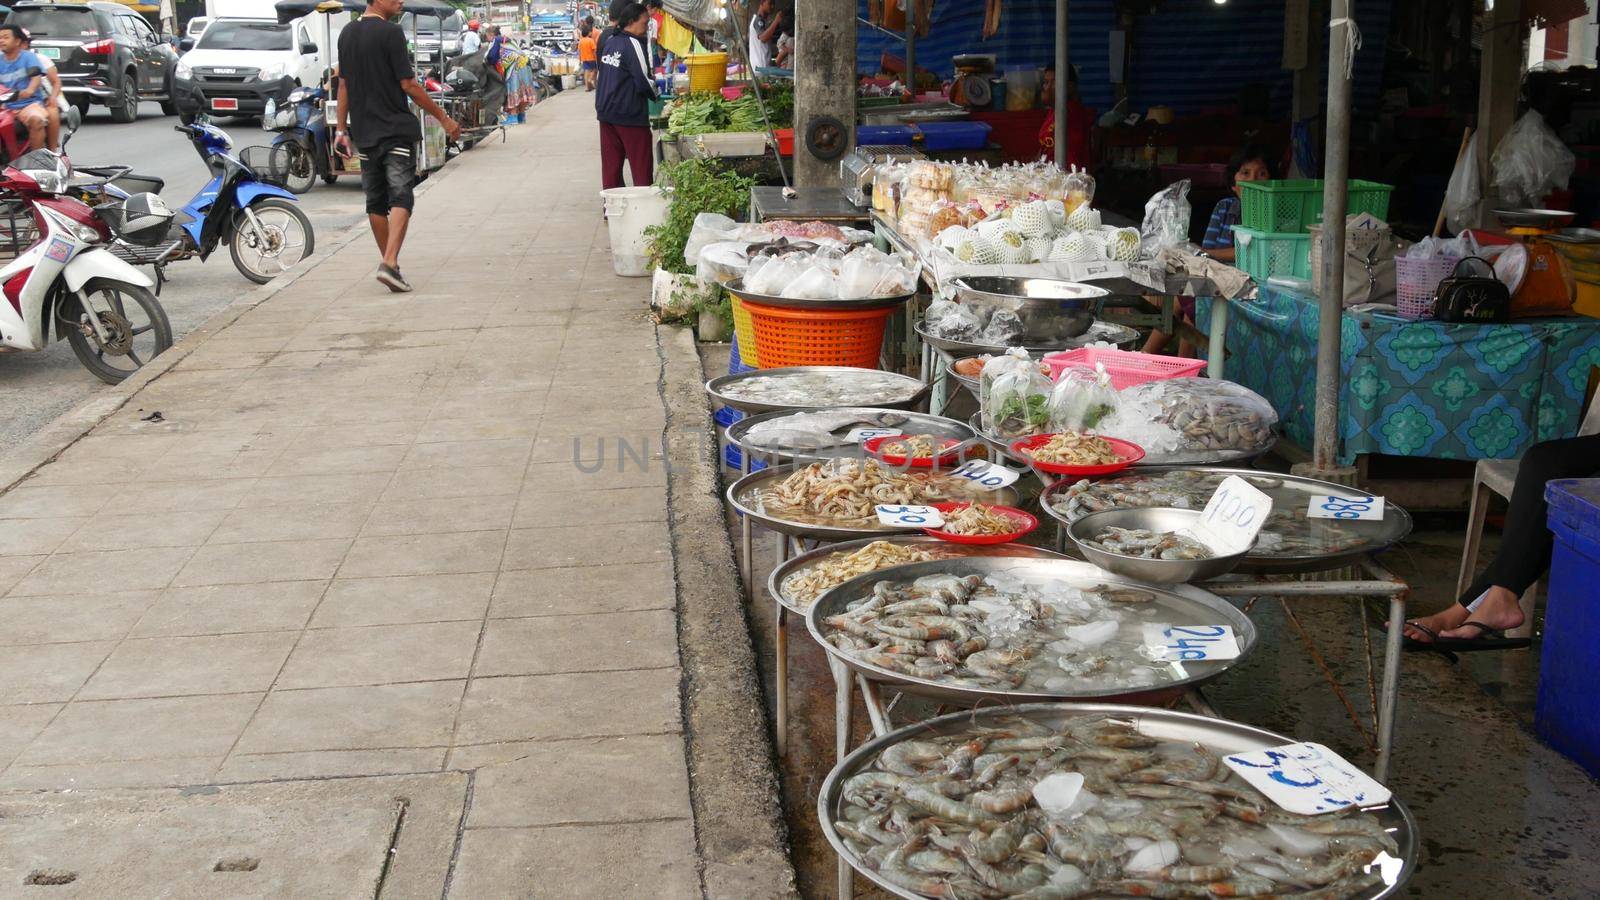 KOH SAMUI ISLAND, THAILAND - 10 JULY 2019: Food market for locals. Lively ranks with groceries. Typical daily life on the street in Asia. People go shopping for fruits vegetables, seafood and meat. by DogoraSun